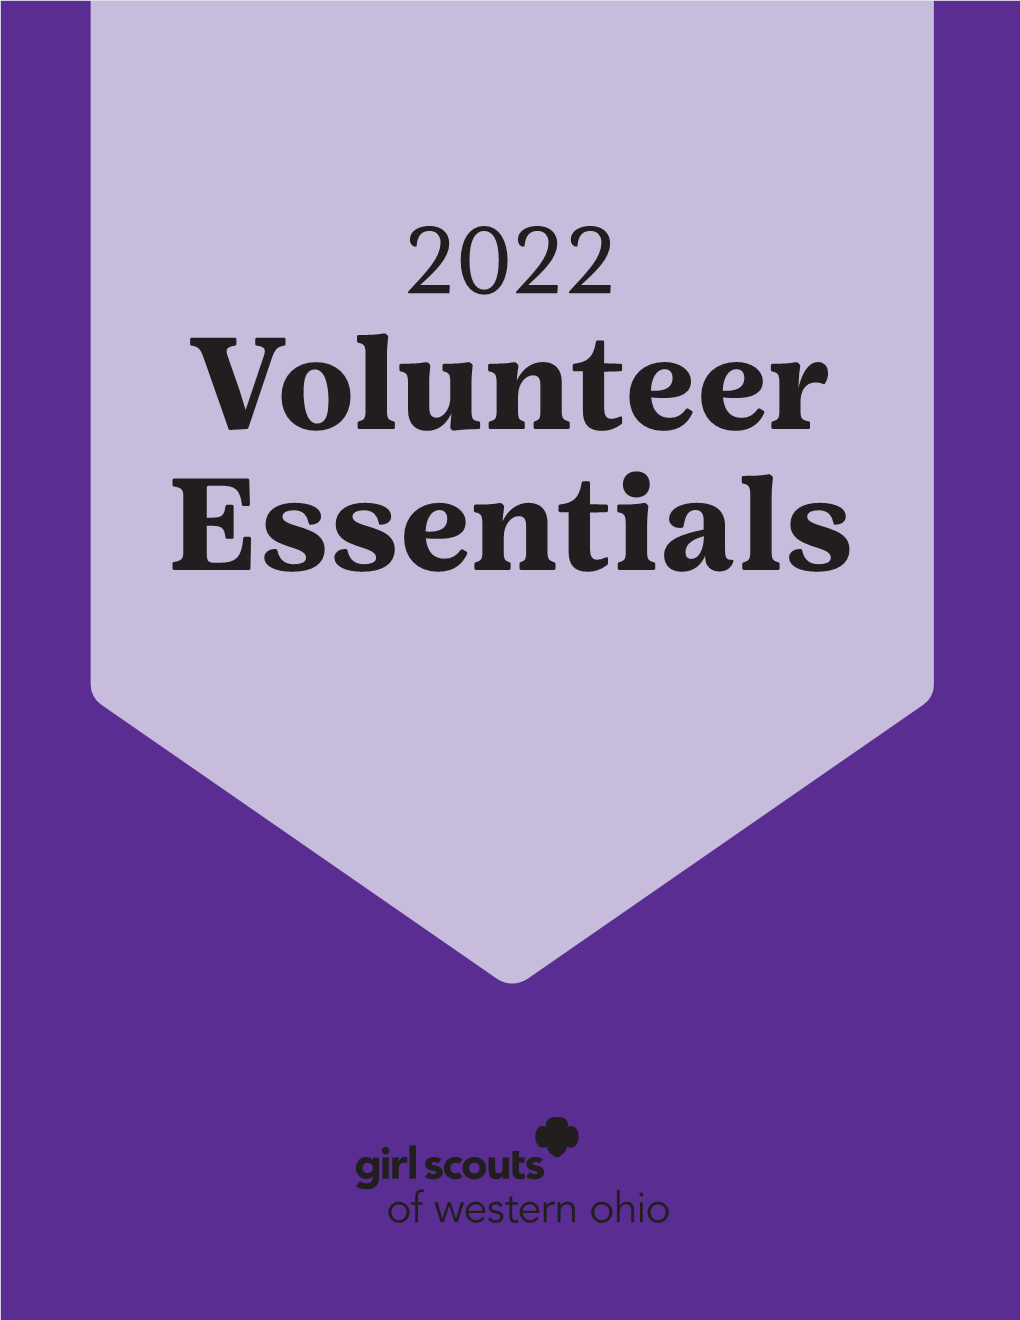 Volunteer Essentials When This Book Was Completed (June 2021), GSWO Was Still Following COVID-19 Guidelines for Safe Interactions in Girl Scout Activities